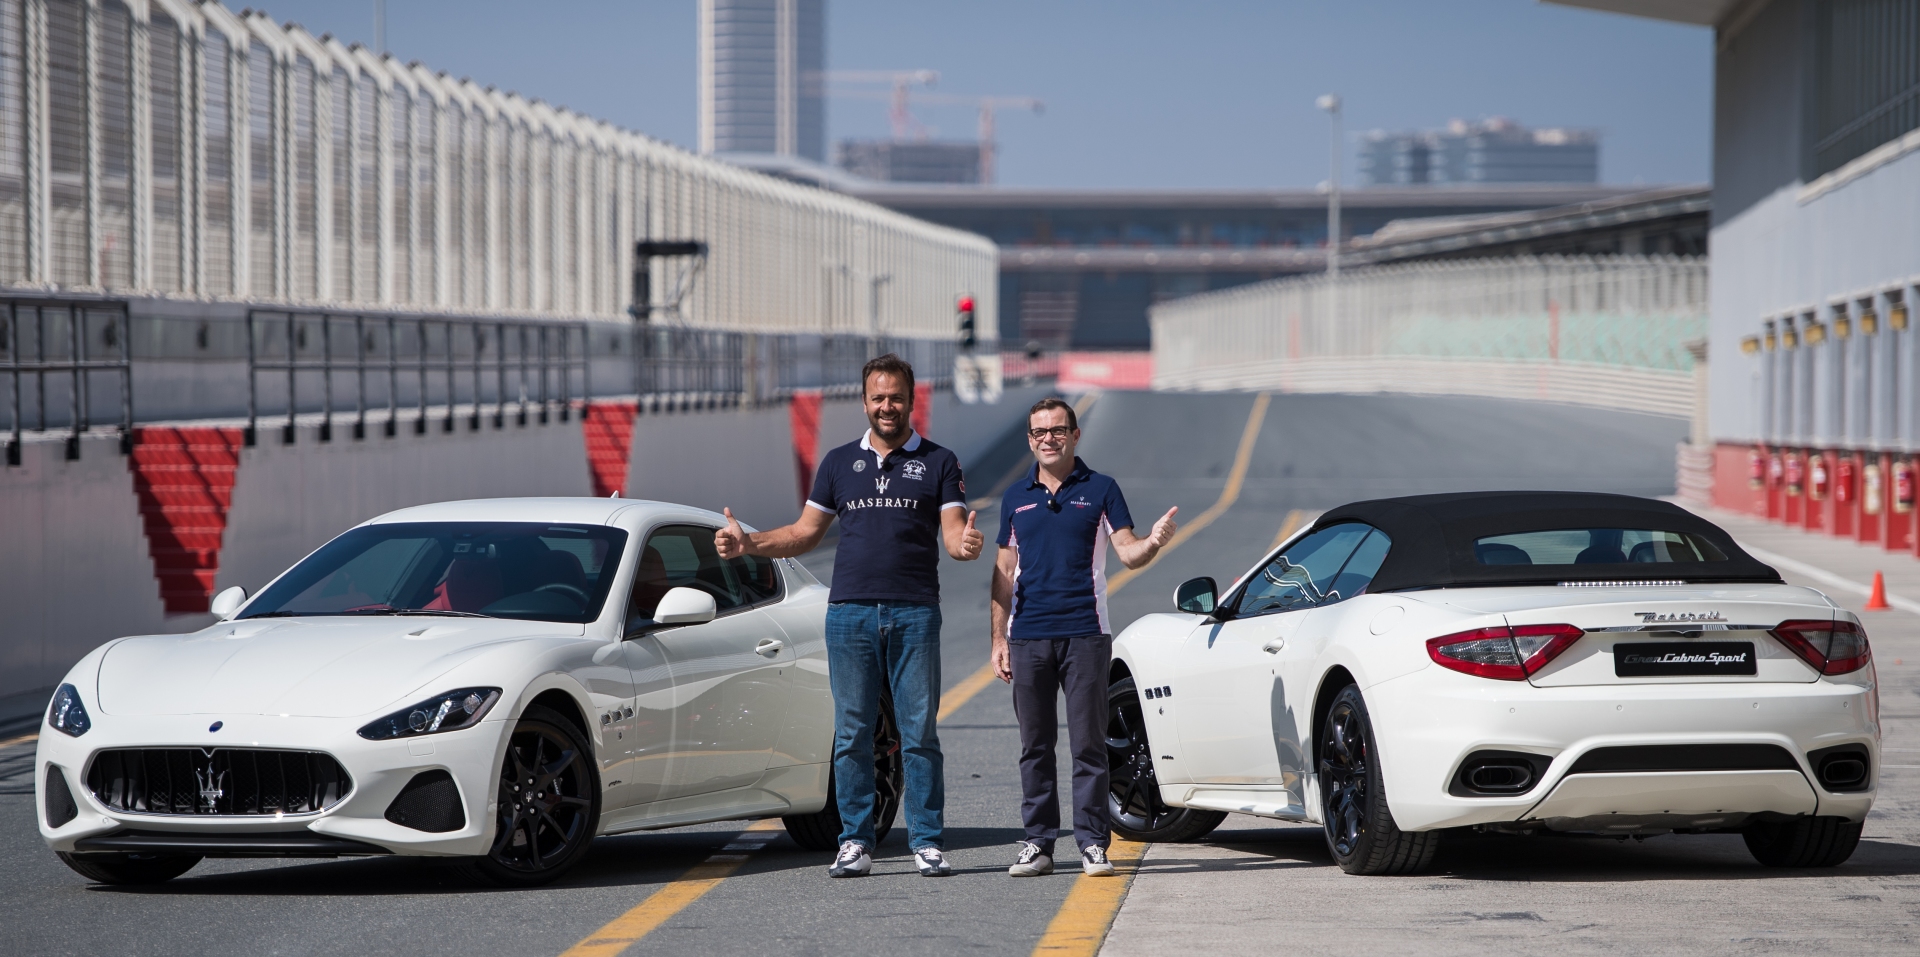 the official Maserati importer-dealer in the UAE